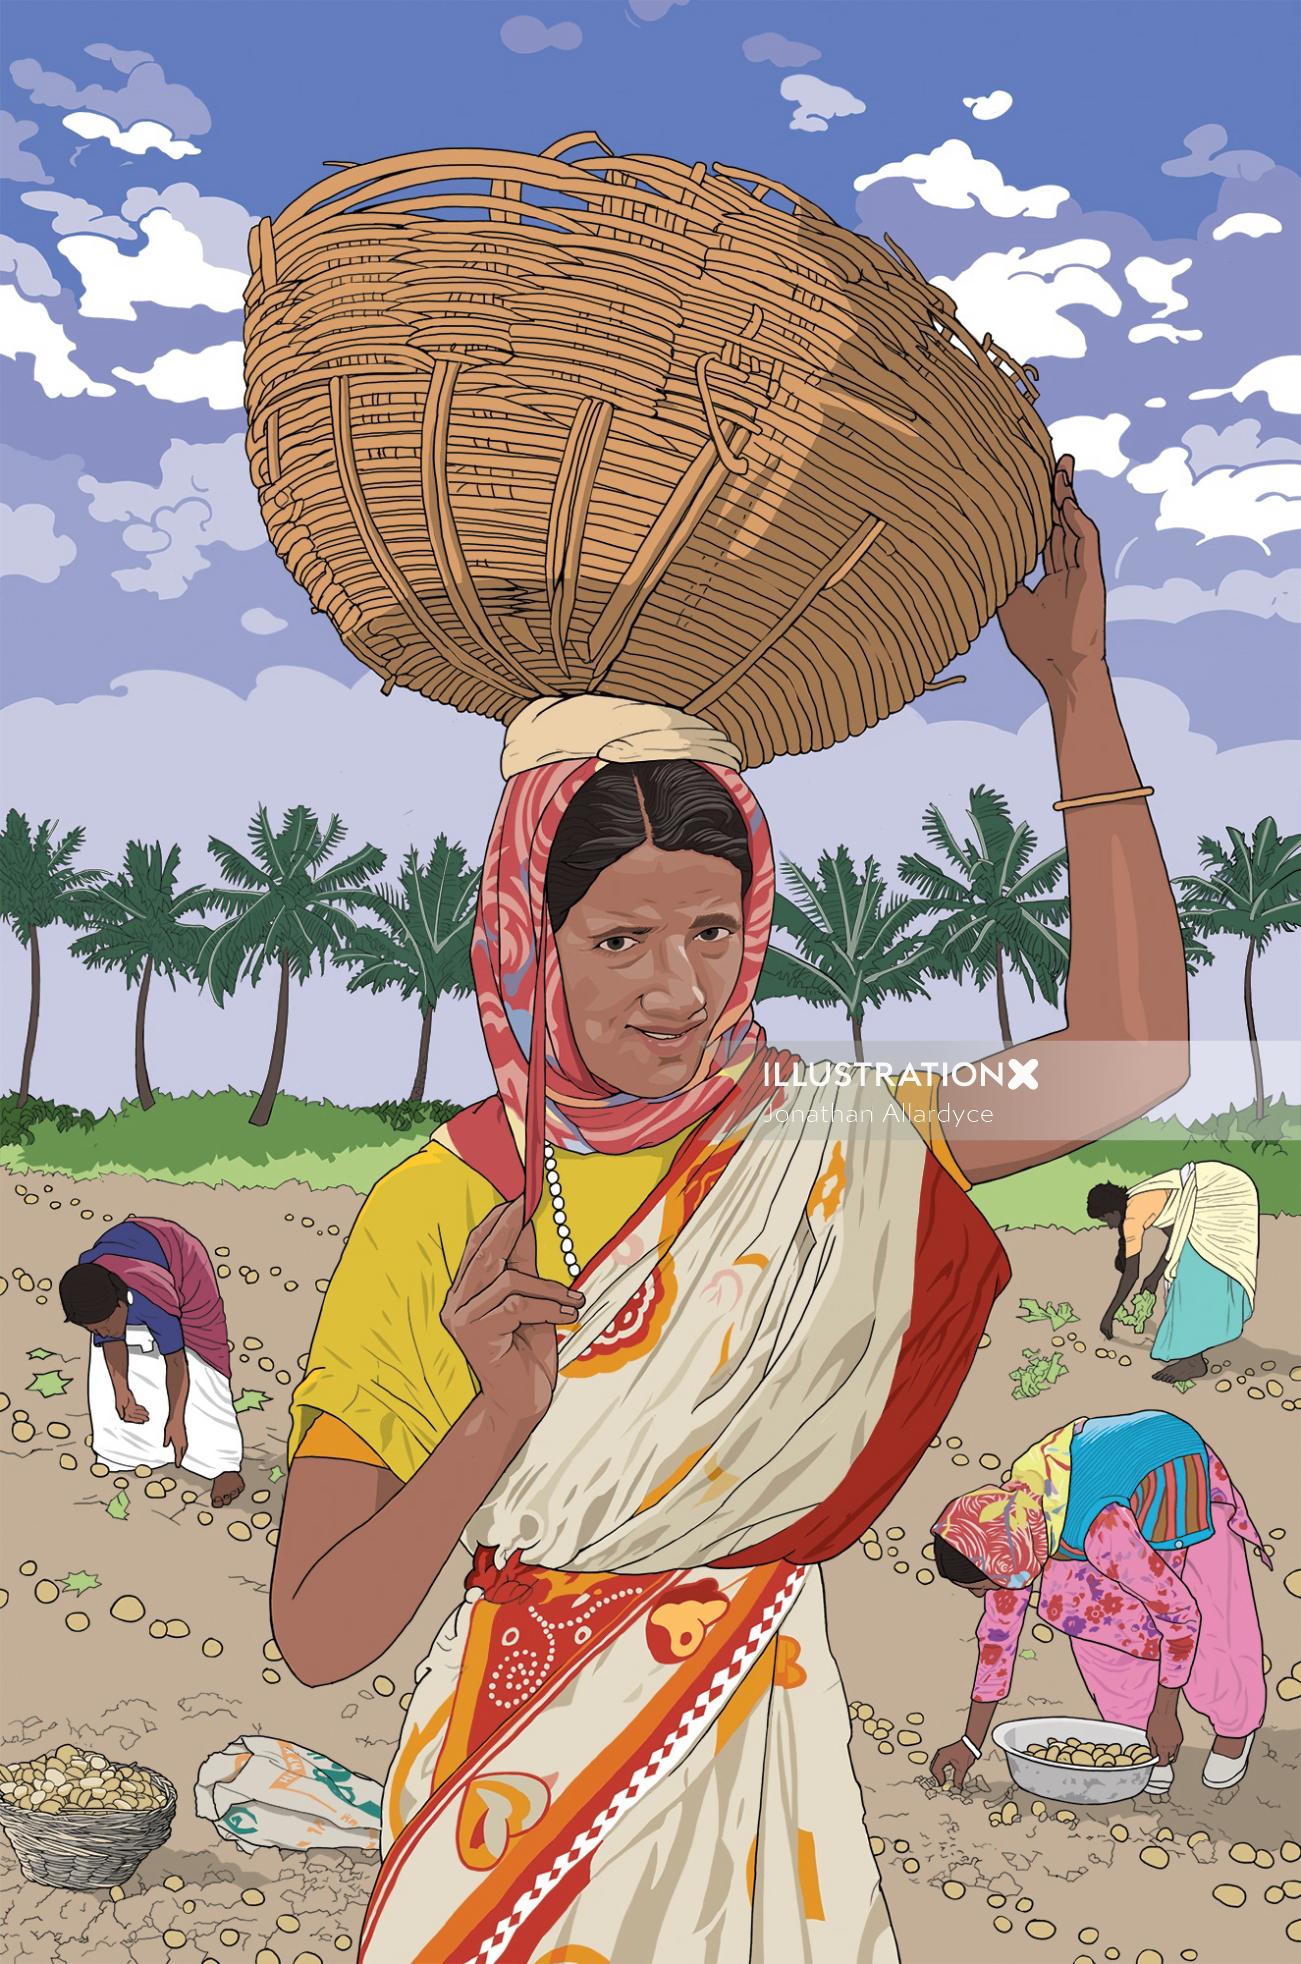 Clothing of an indian lady working in field
